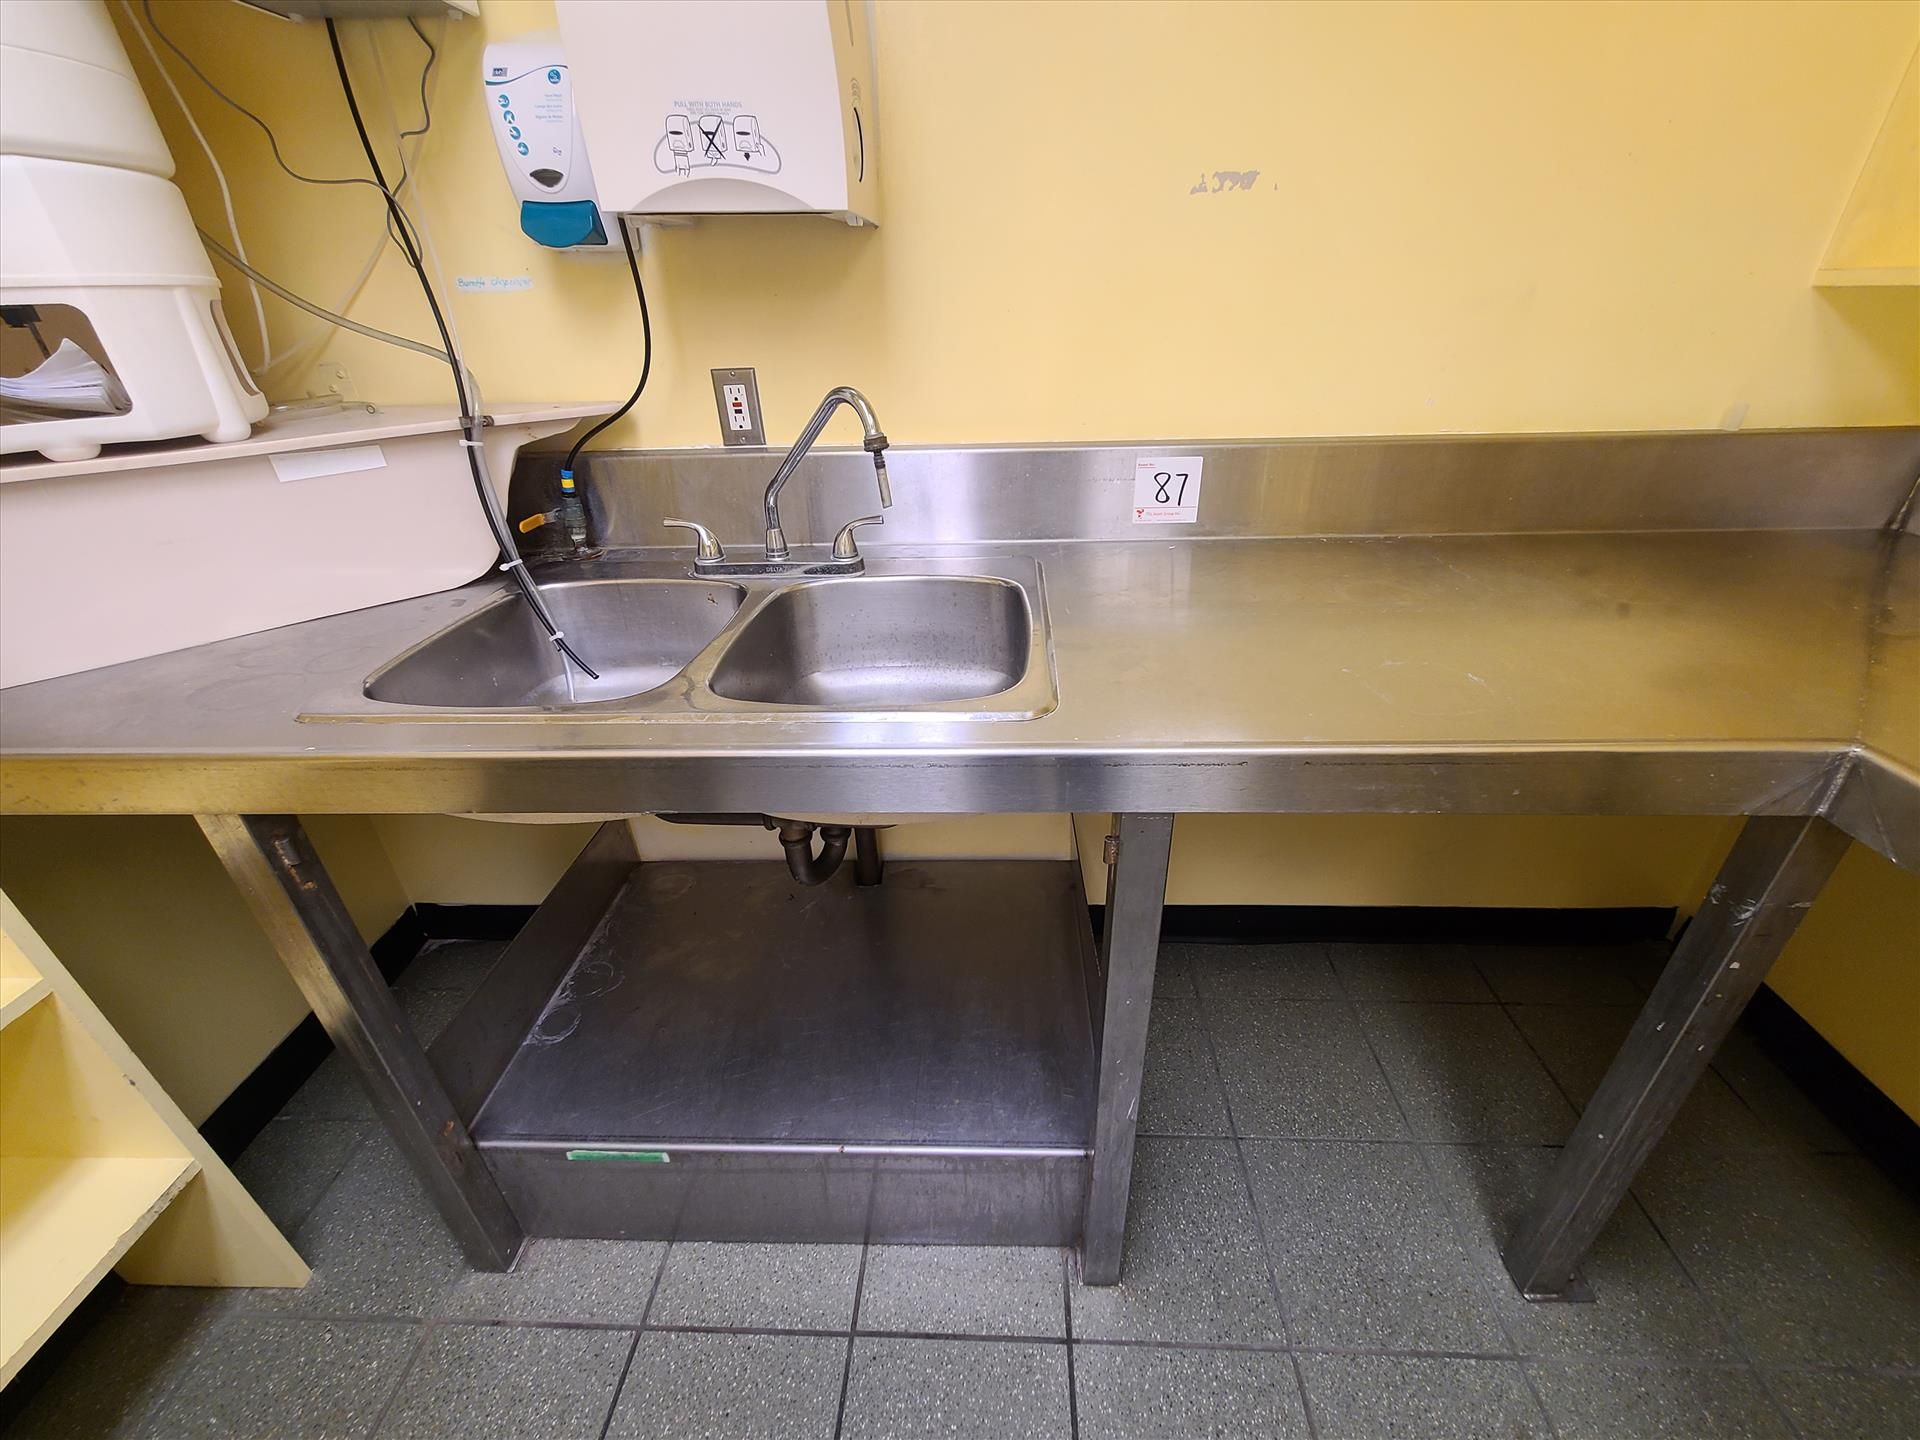 counter, stainless steel, approx. 28 in. x 22 ft. w/ sink [Loc. Lab] - Image 2 of 4